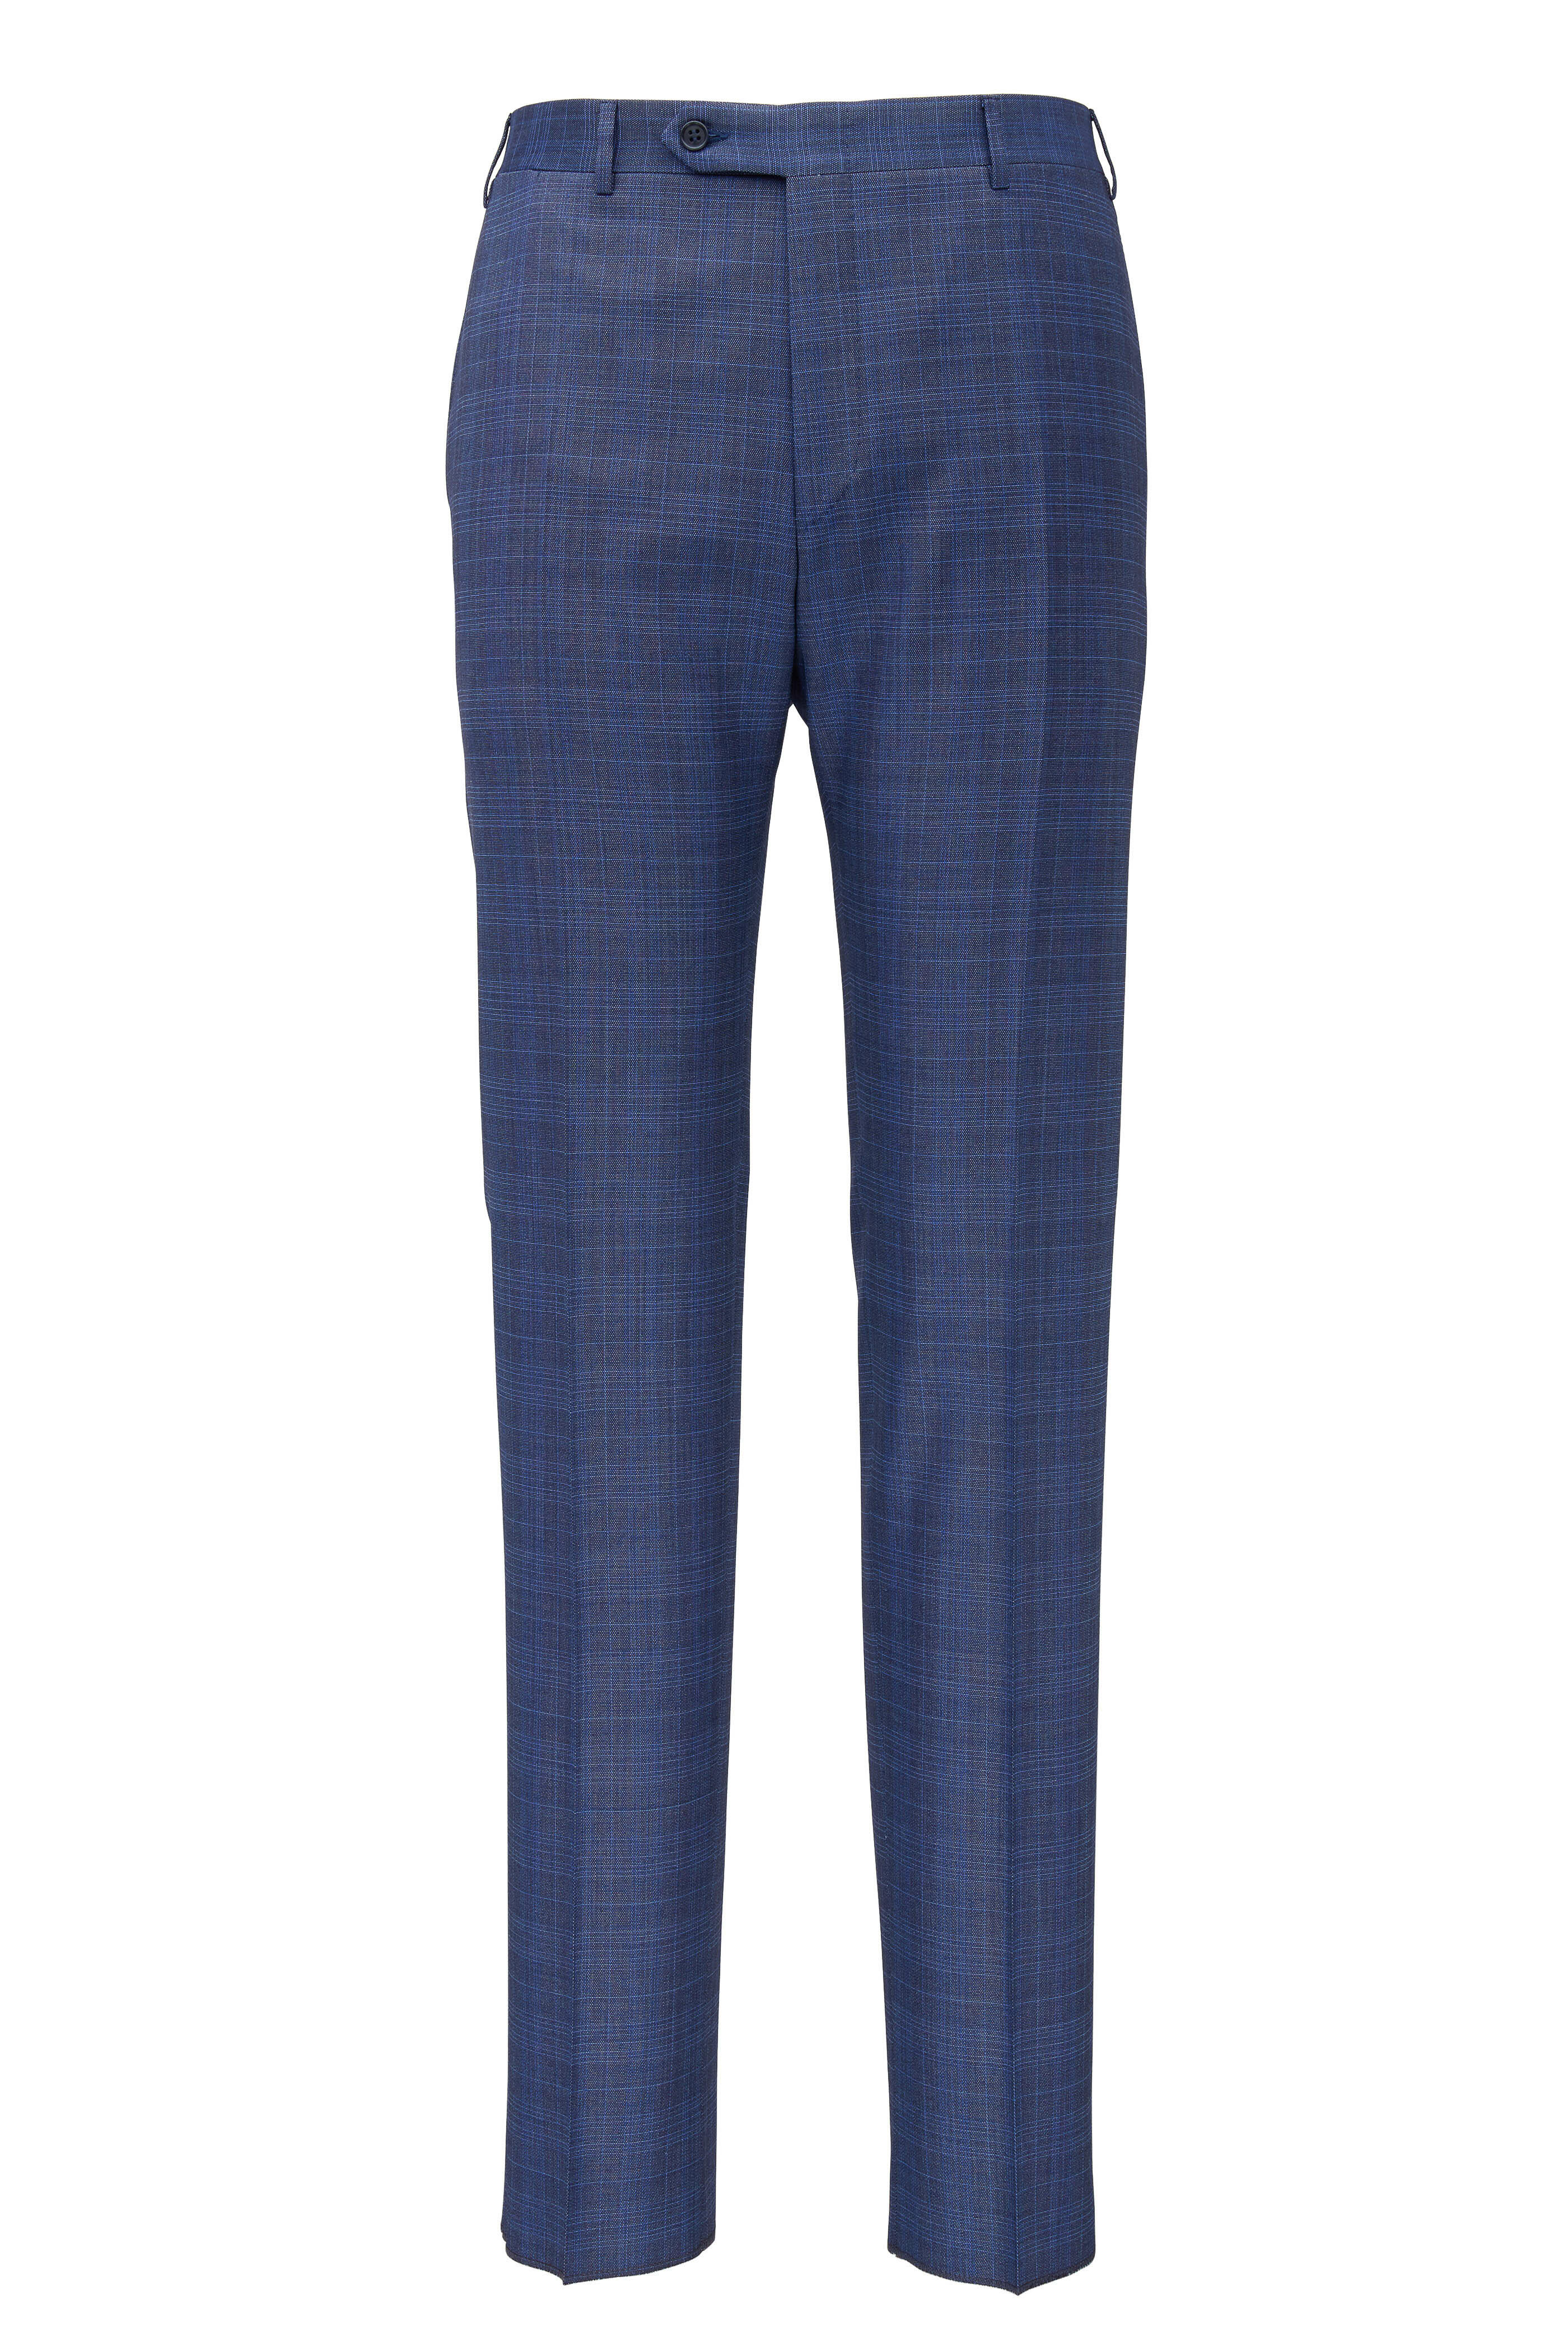 Canali - Royal Blue Plaid Wool Suit | Mitchell Stores